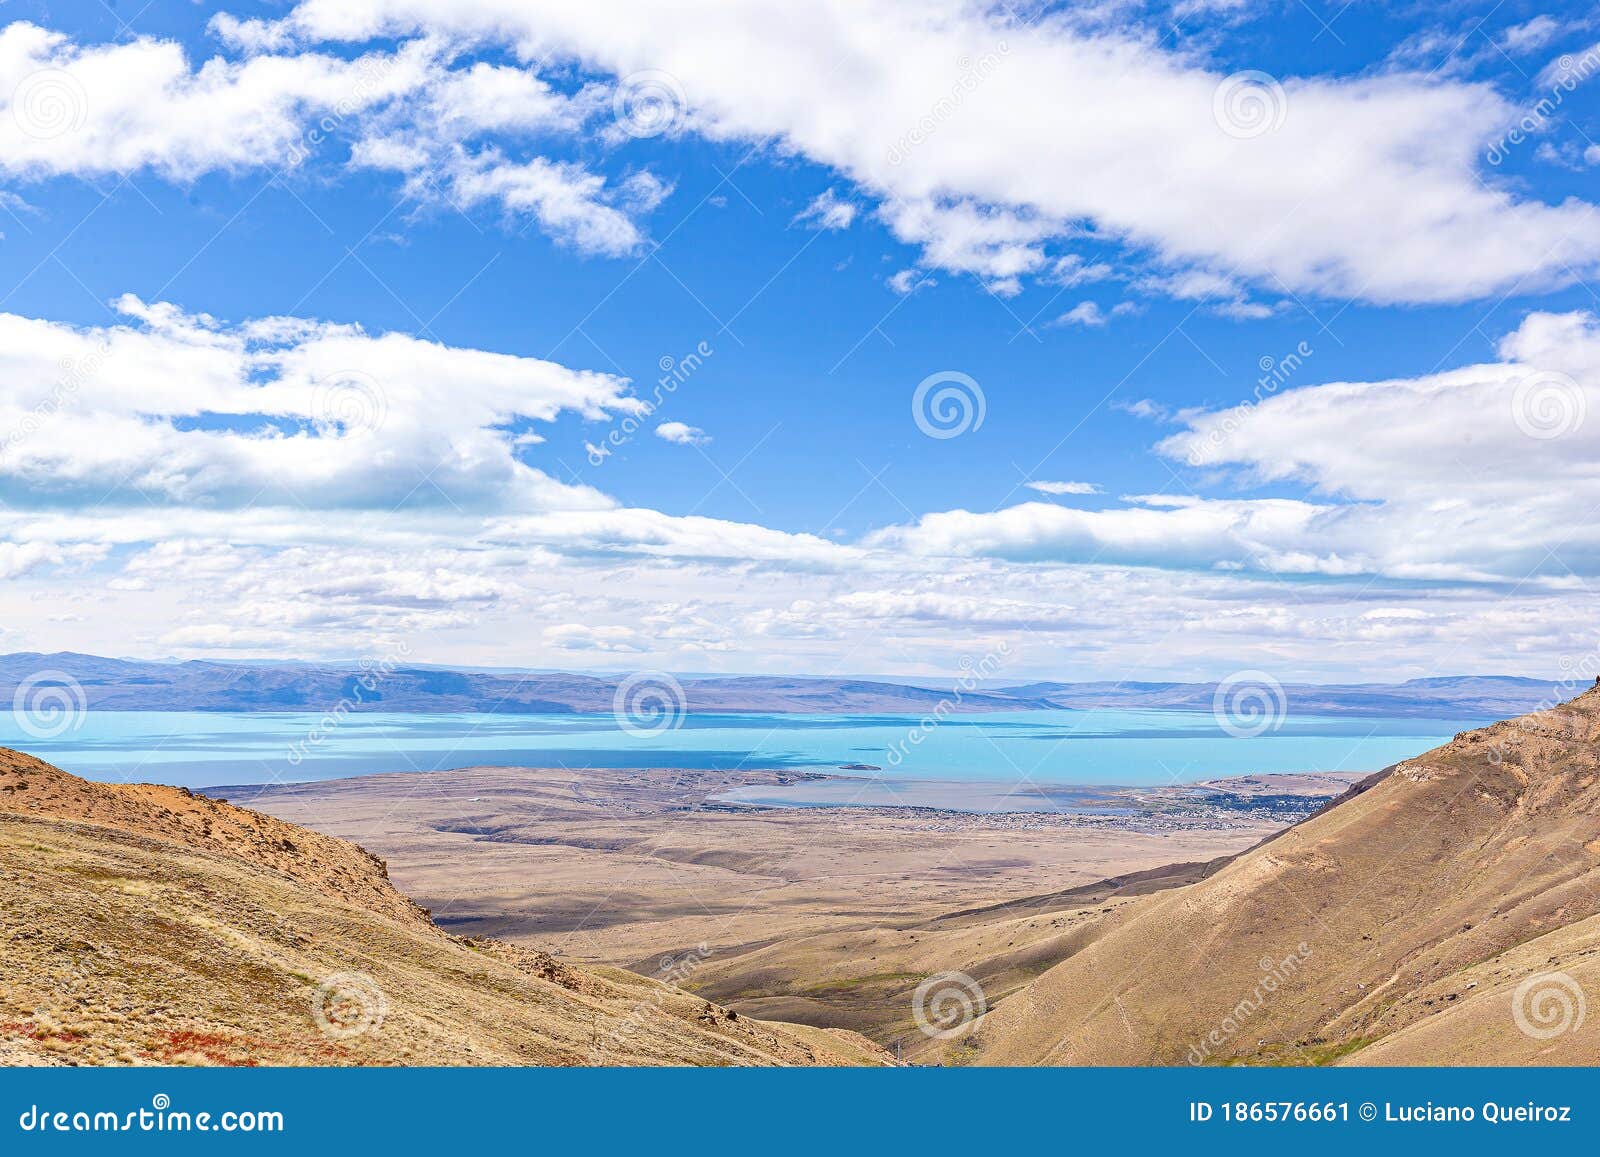 view of argentinean lake, from the top of mount `cerro moyano